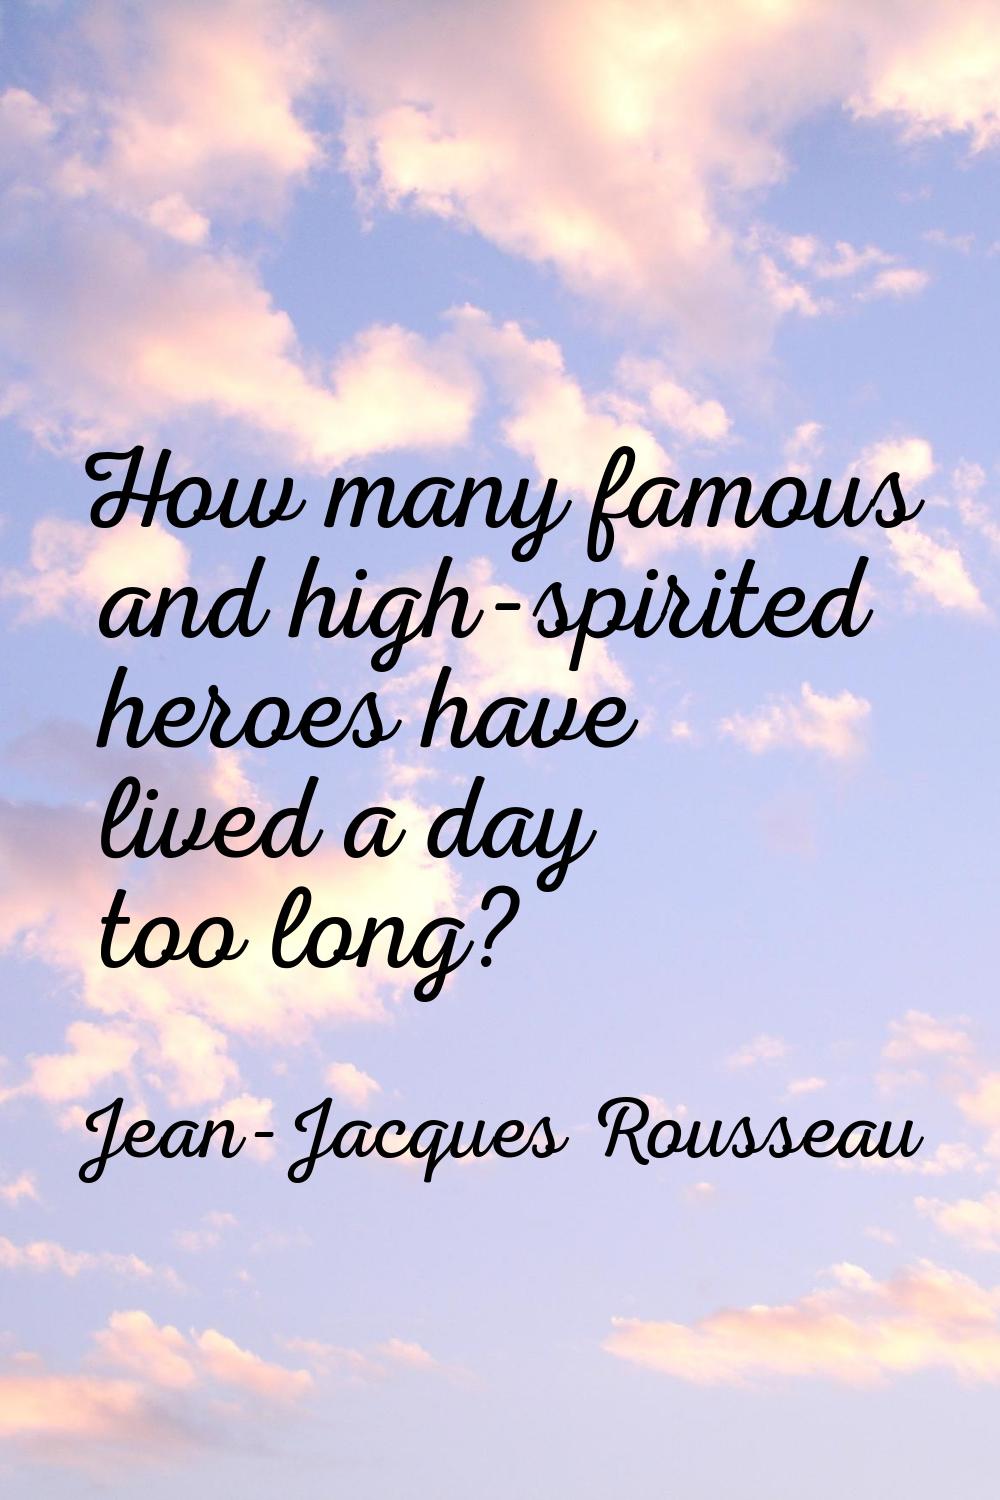 How many famous and high-spirited heroes have lived a day too long?